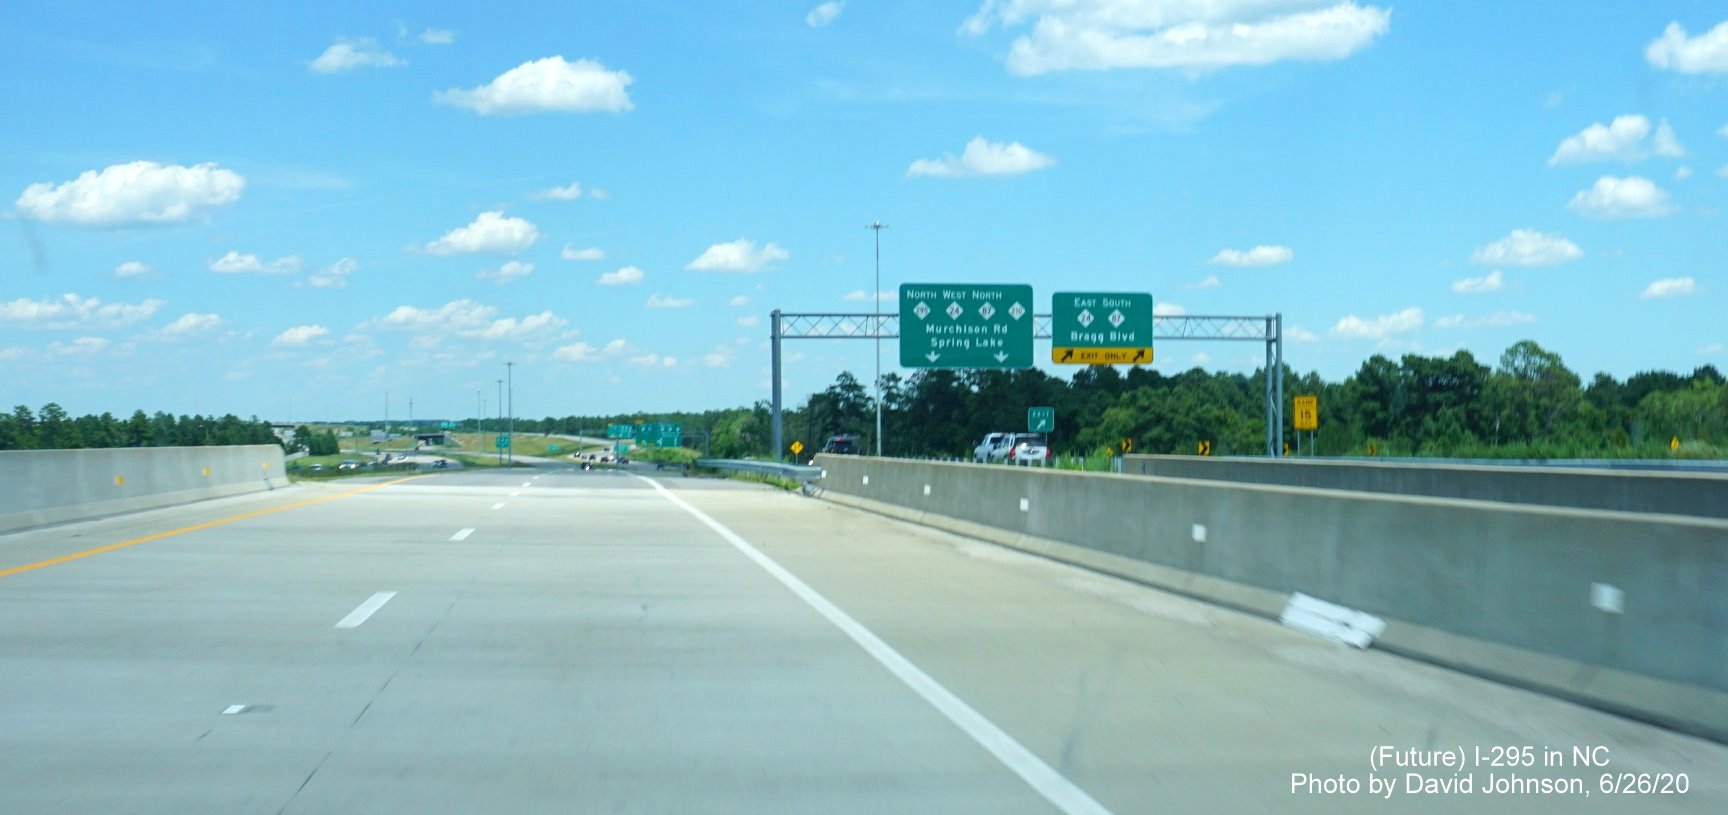 Image of overhead signage along NC 24/87 C/D lanes approaching the Murchison Road exit along I-295 North in Fayetteville, by David Johnson June 2020